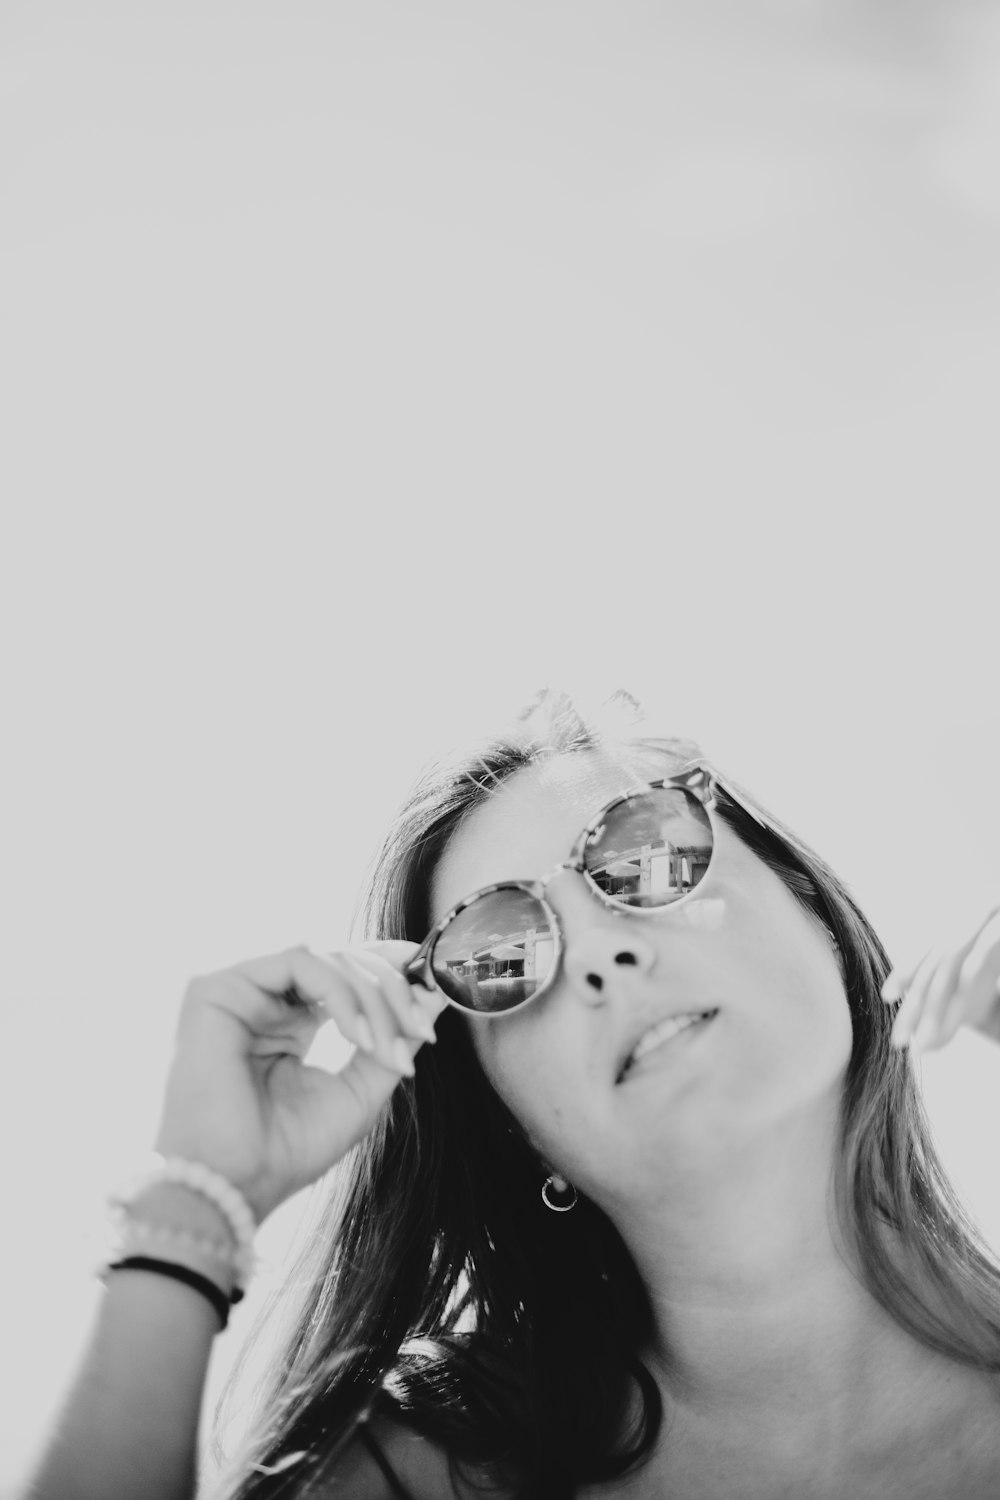 grayscale photo of woman holding sunglasses